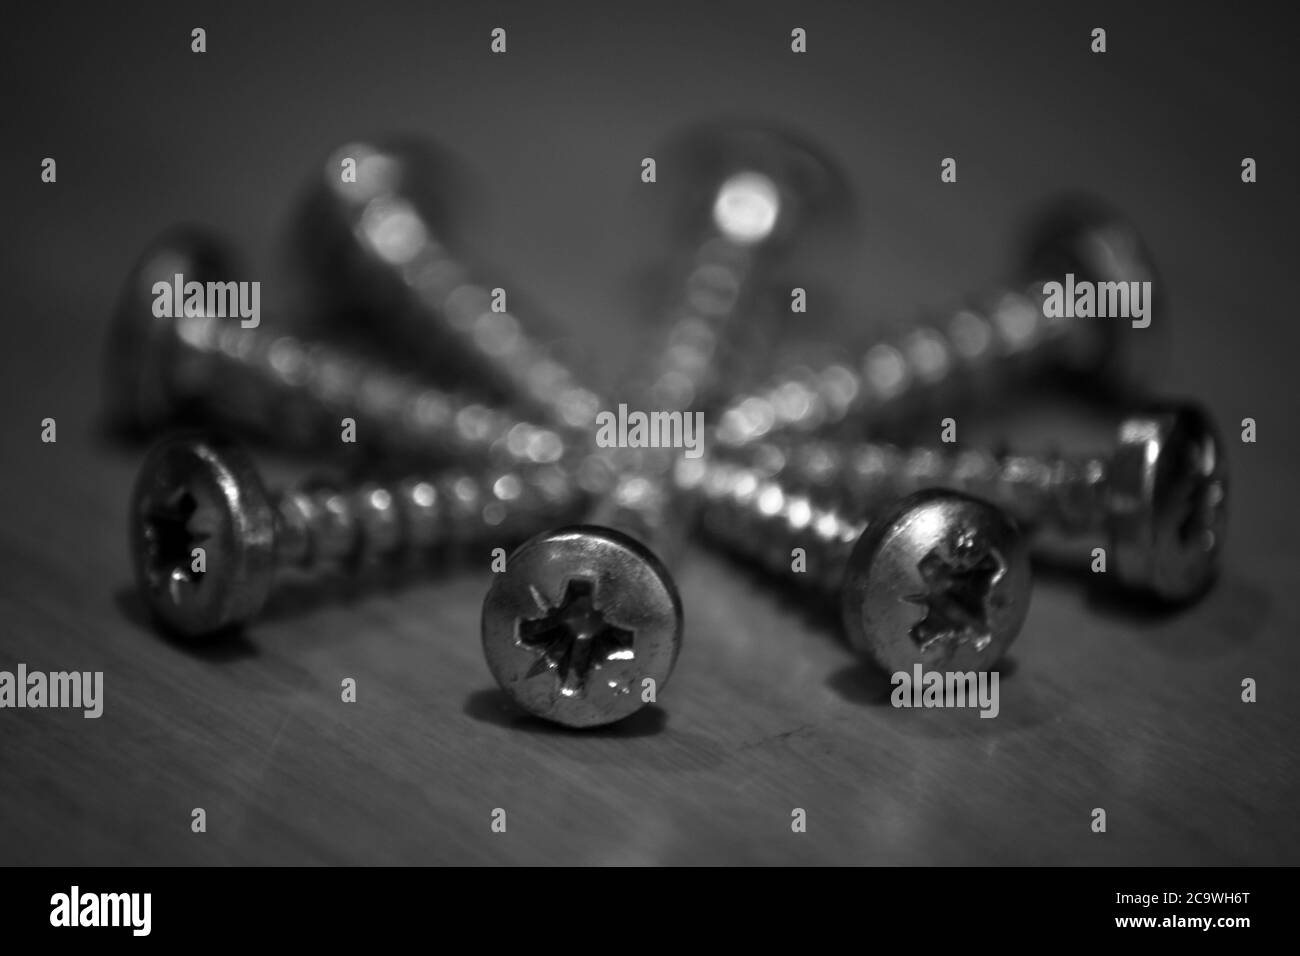 Black and white screws arranged in a circle Stock Photo